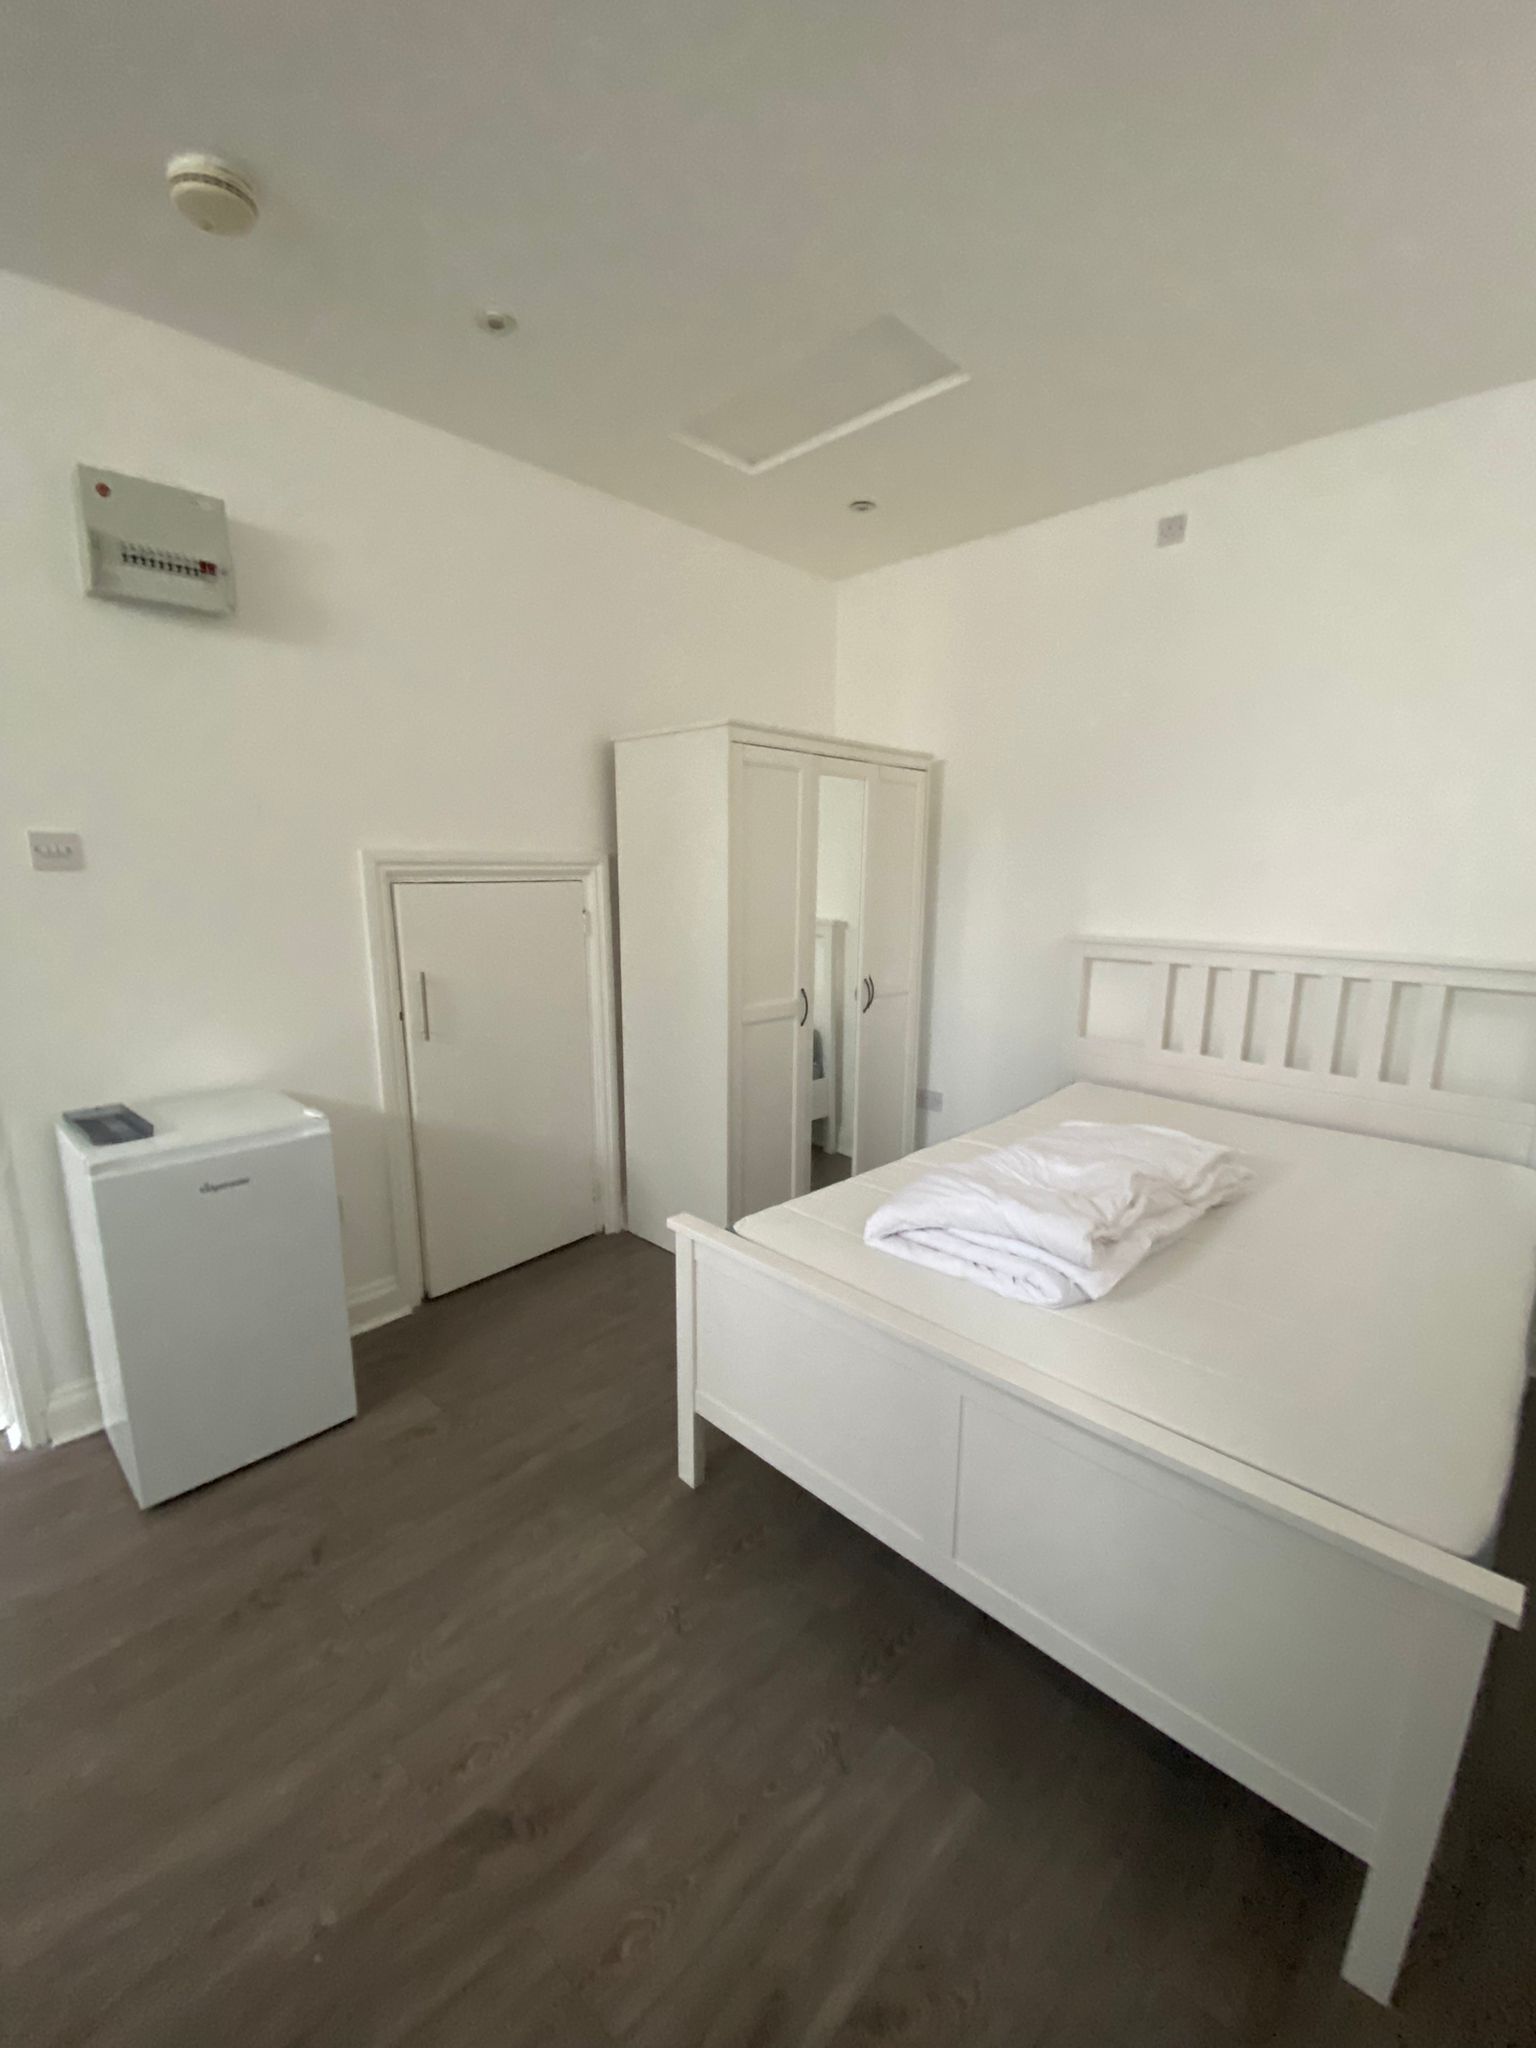 0 bed Apartment/Flat/Studio for rent in Hammersmith. From PropertyLoop